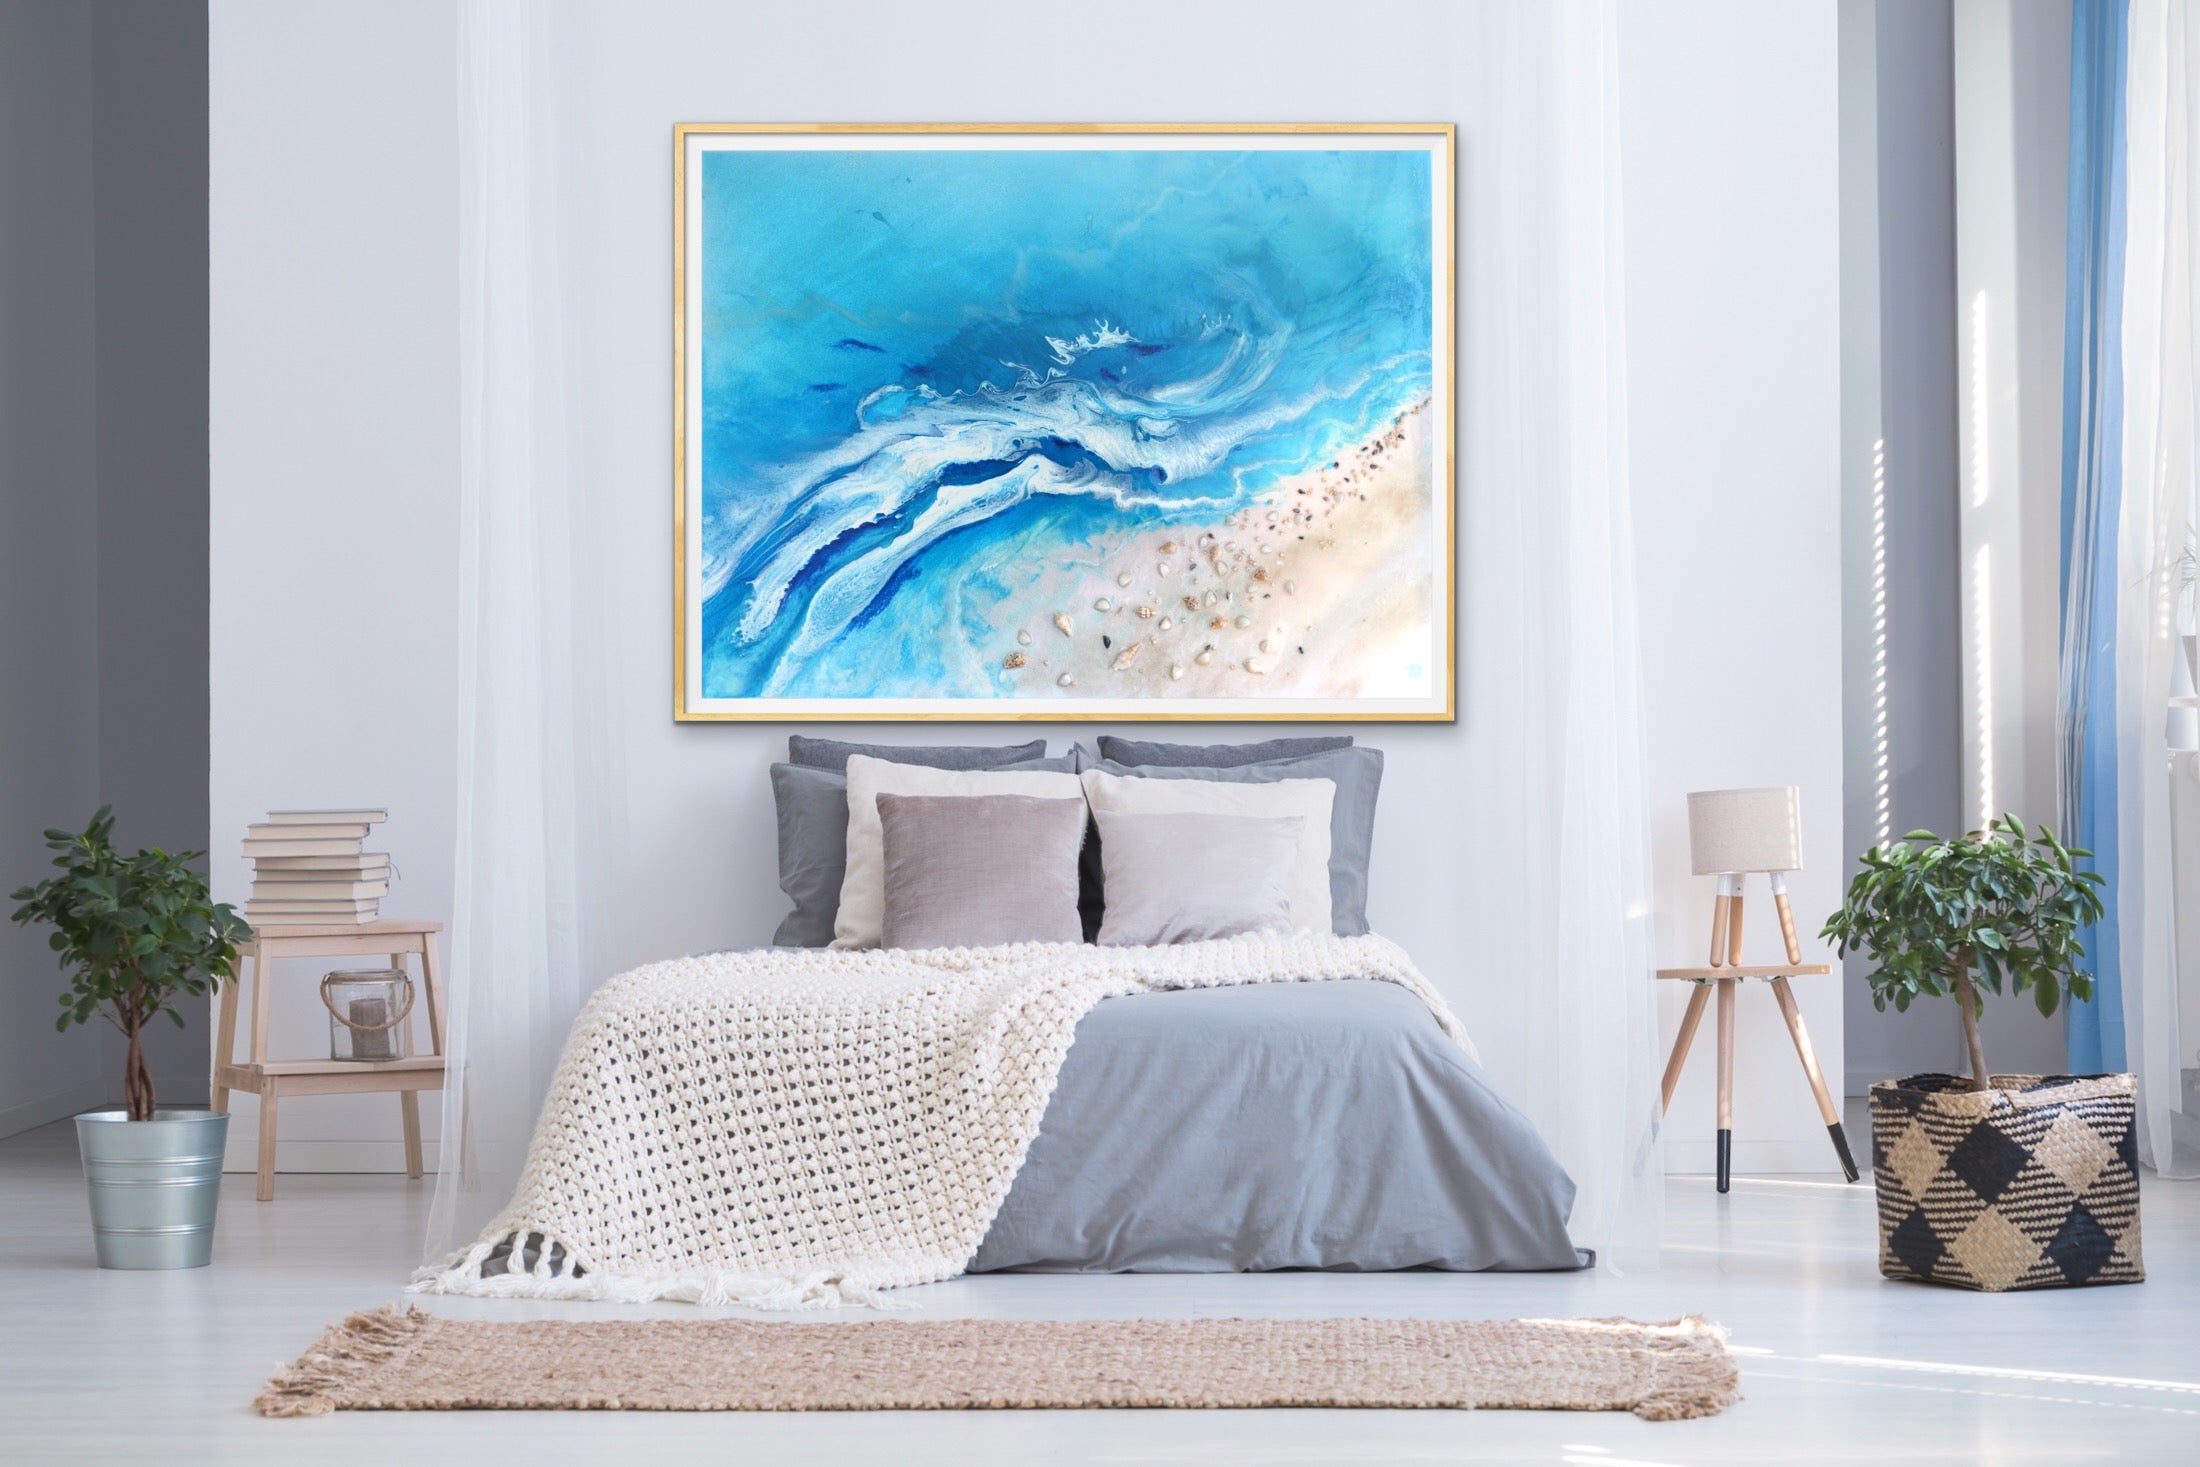 Abstract Seascape. Teal Ocean. Bali Utopia 4. Art Print. Antuanelle 2 Limited Edition Print